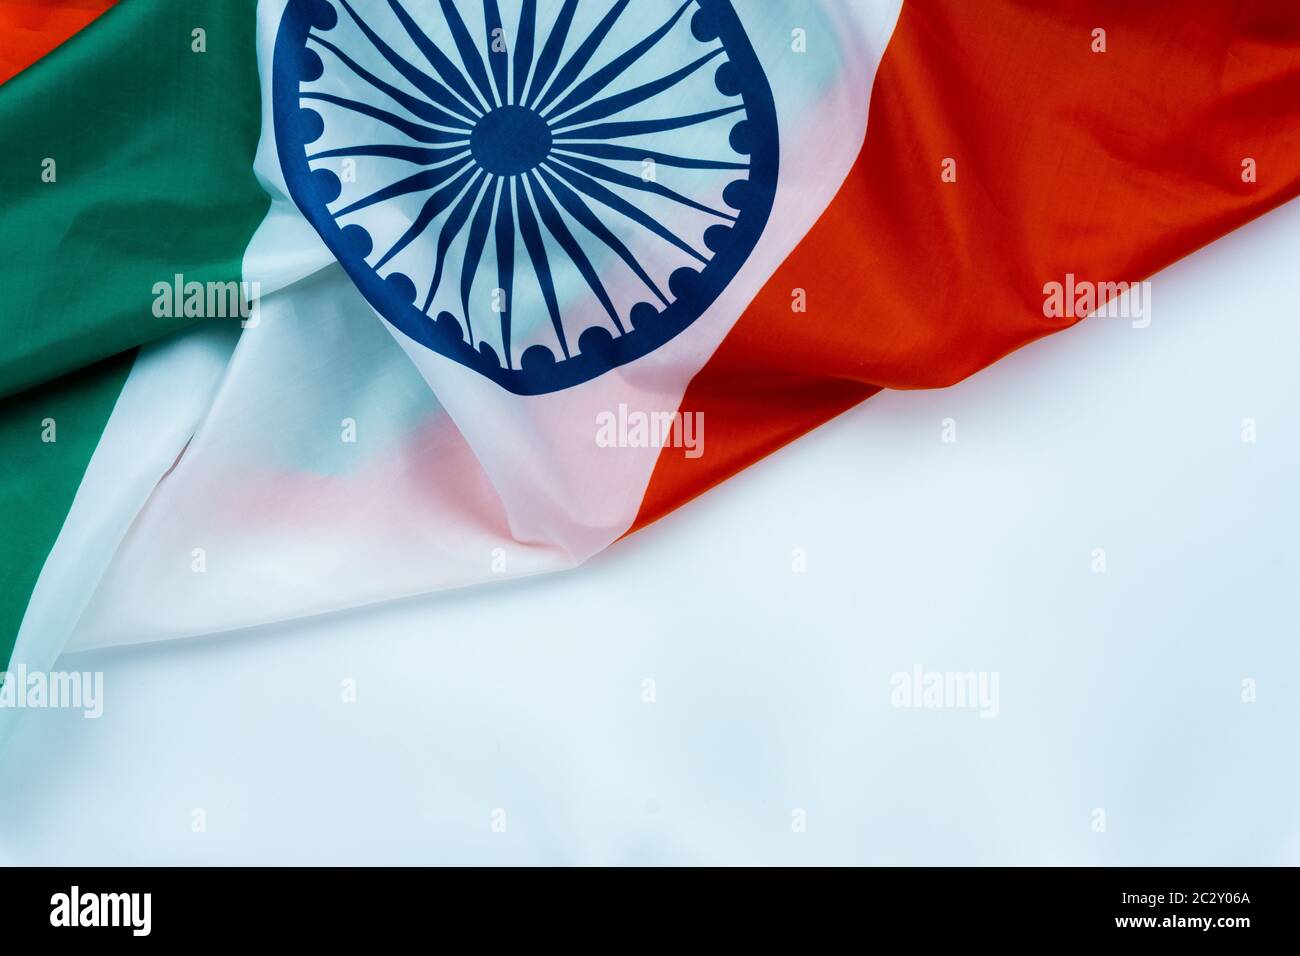 National flag of India on white background for Indian Independence ...